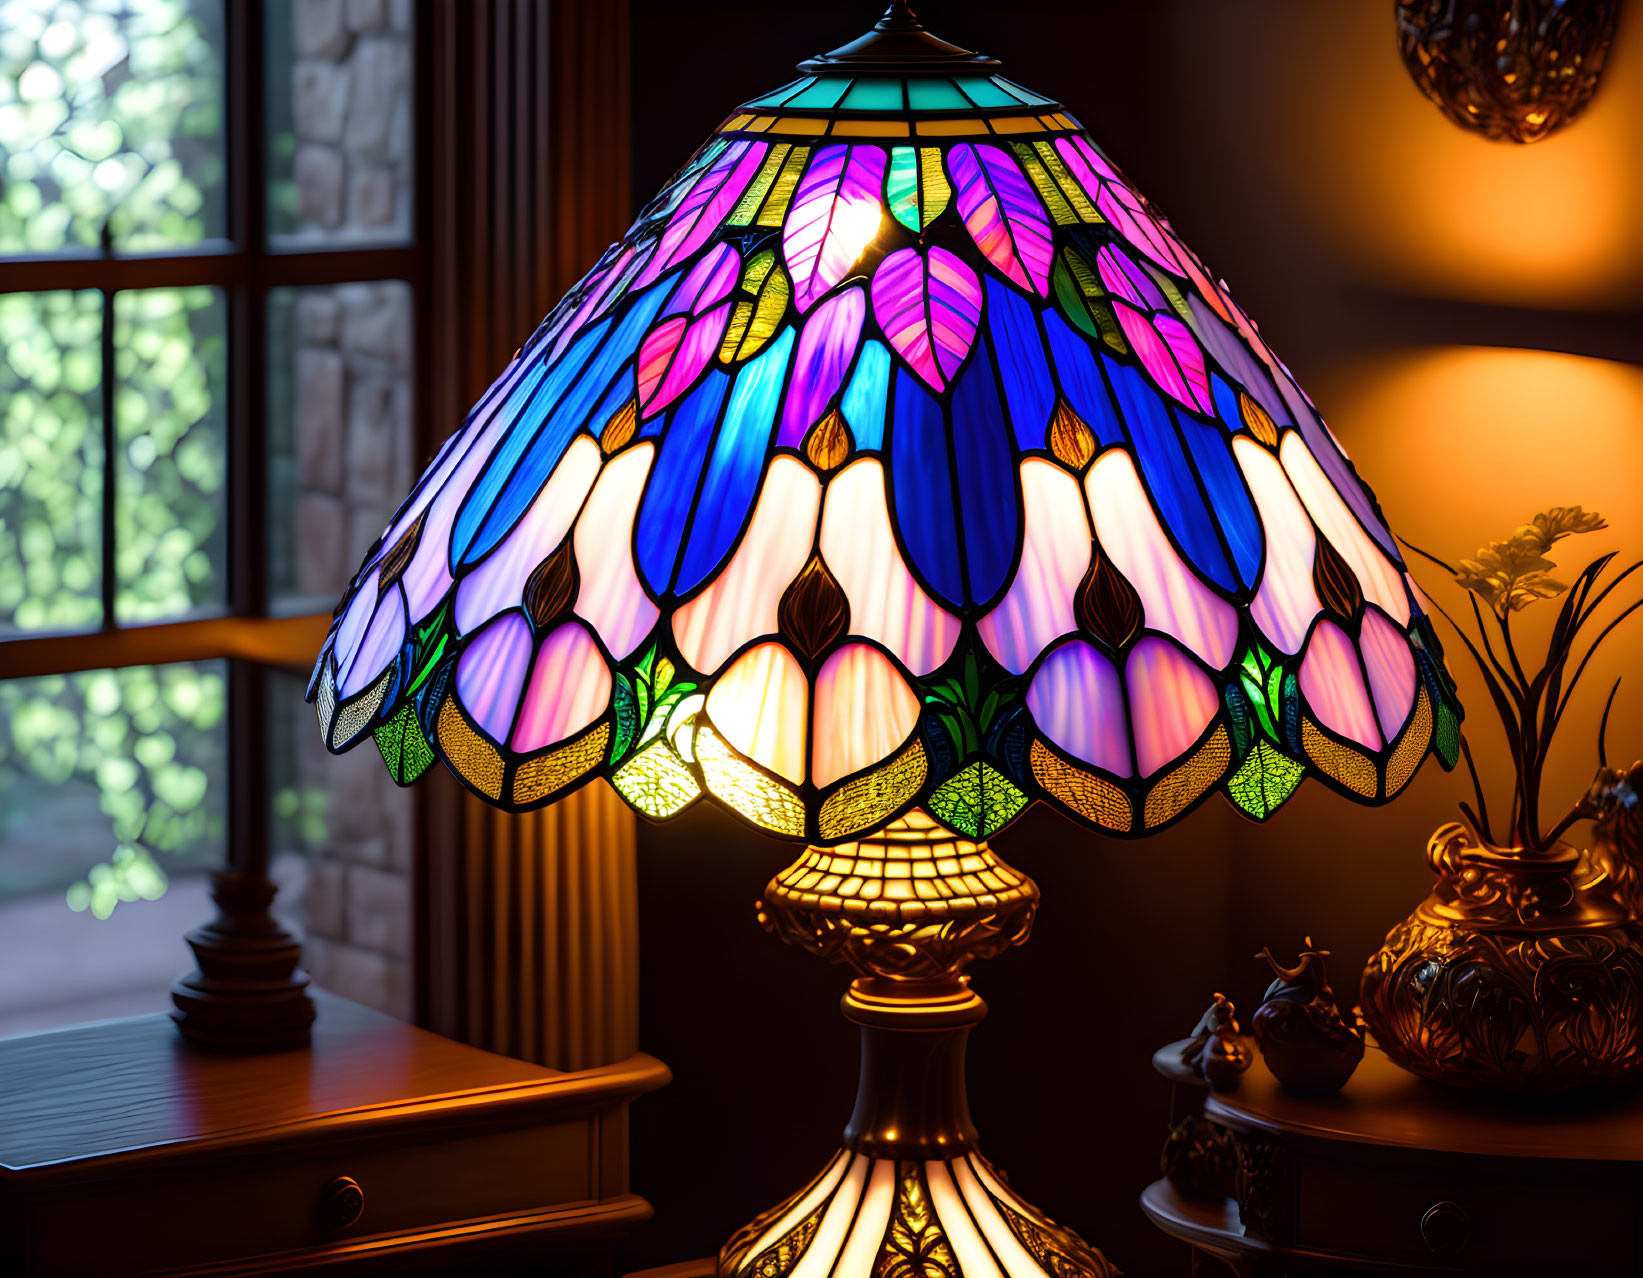 Vibrant Tiffany-style stained glass lamp in cozy room with stone view